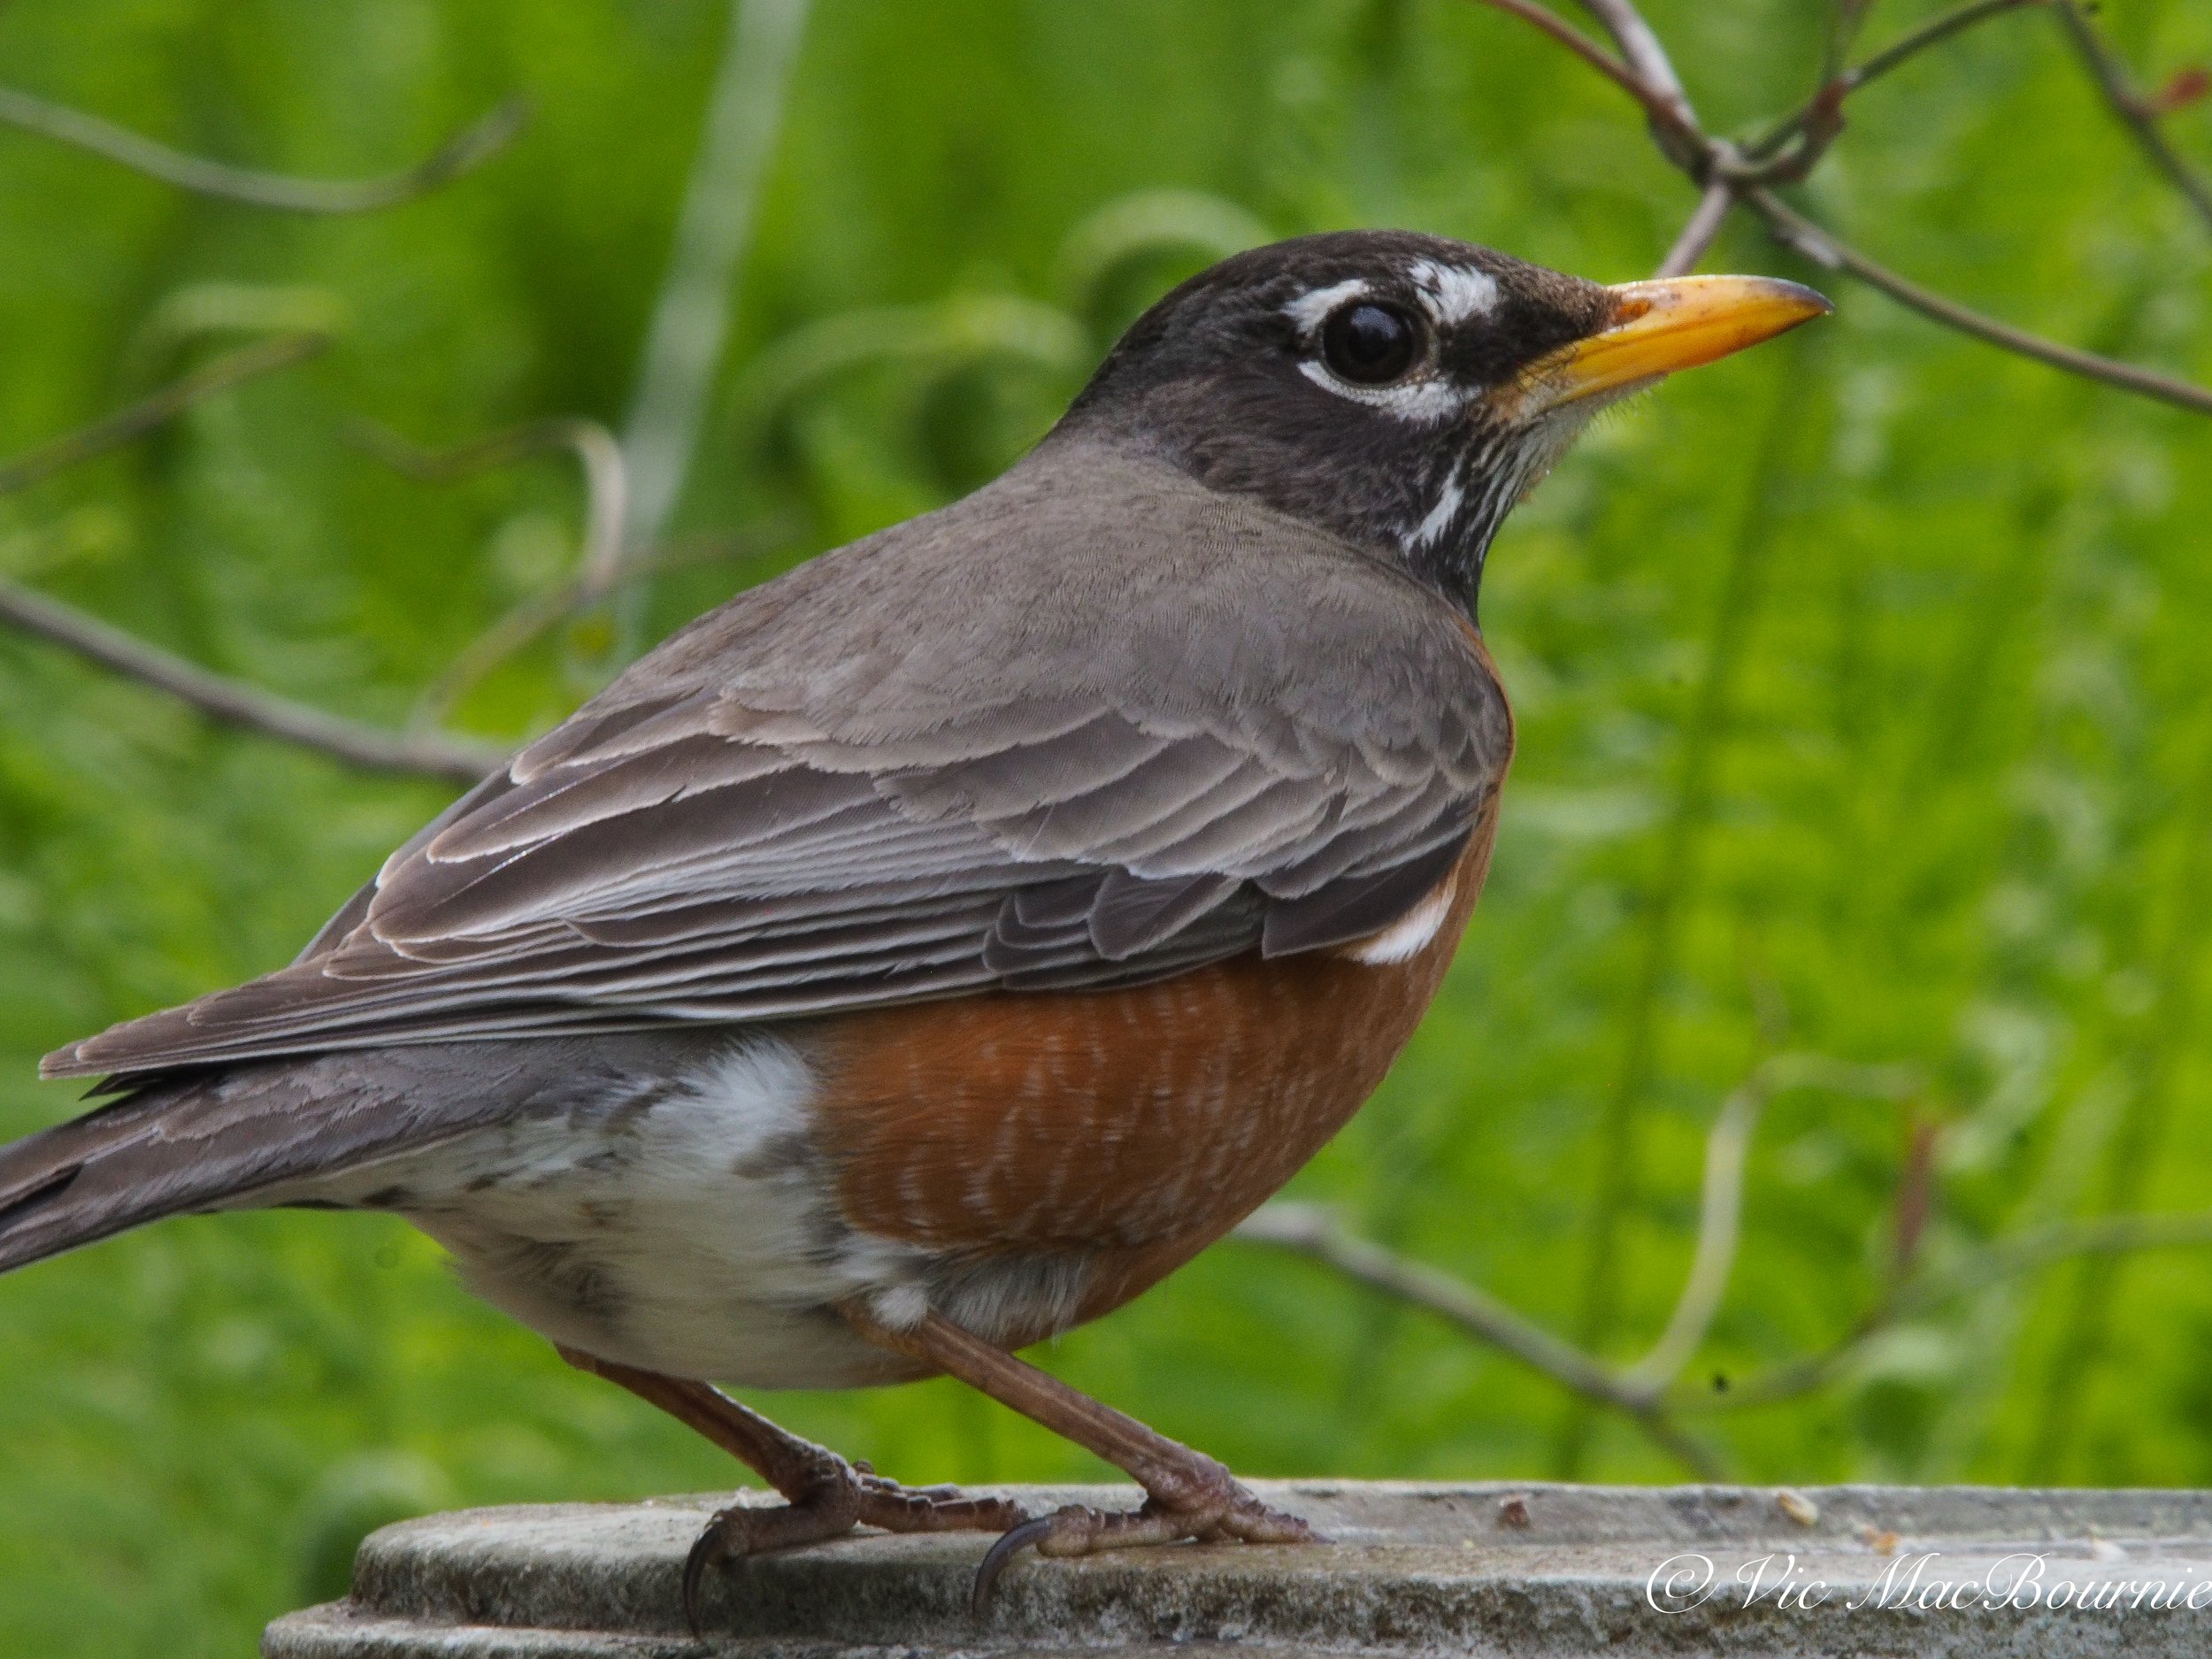 American Robin photographed with the Pentax 300mm f4.5* lens on the Olympus micro four thirds camera.